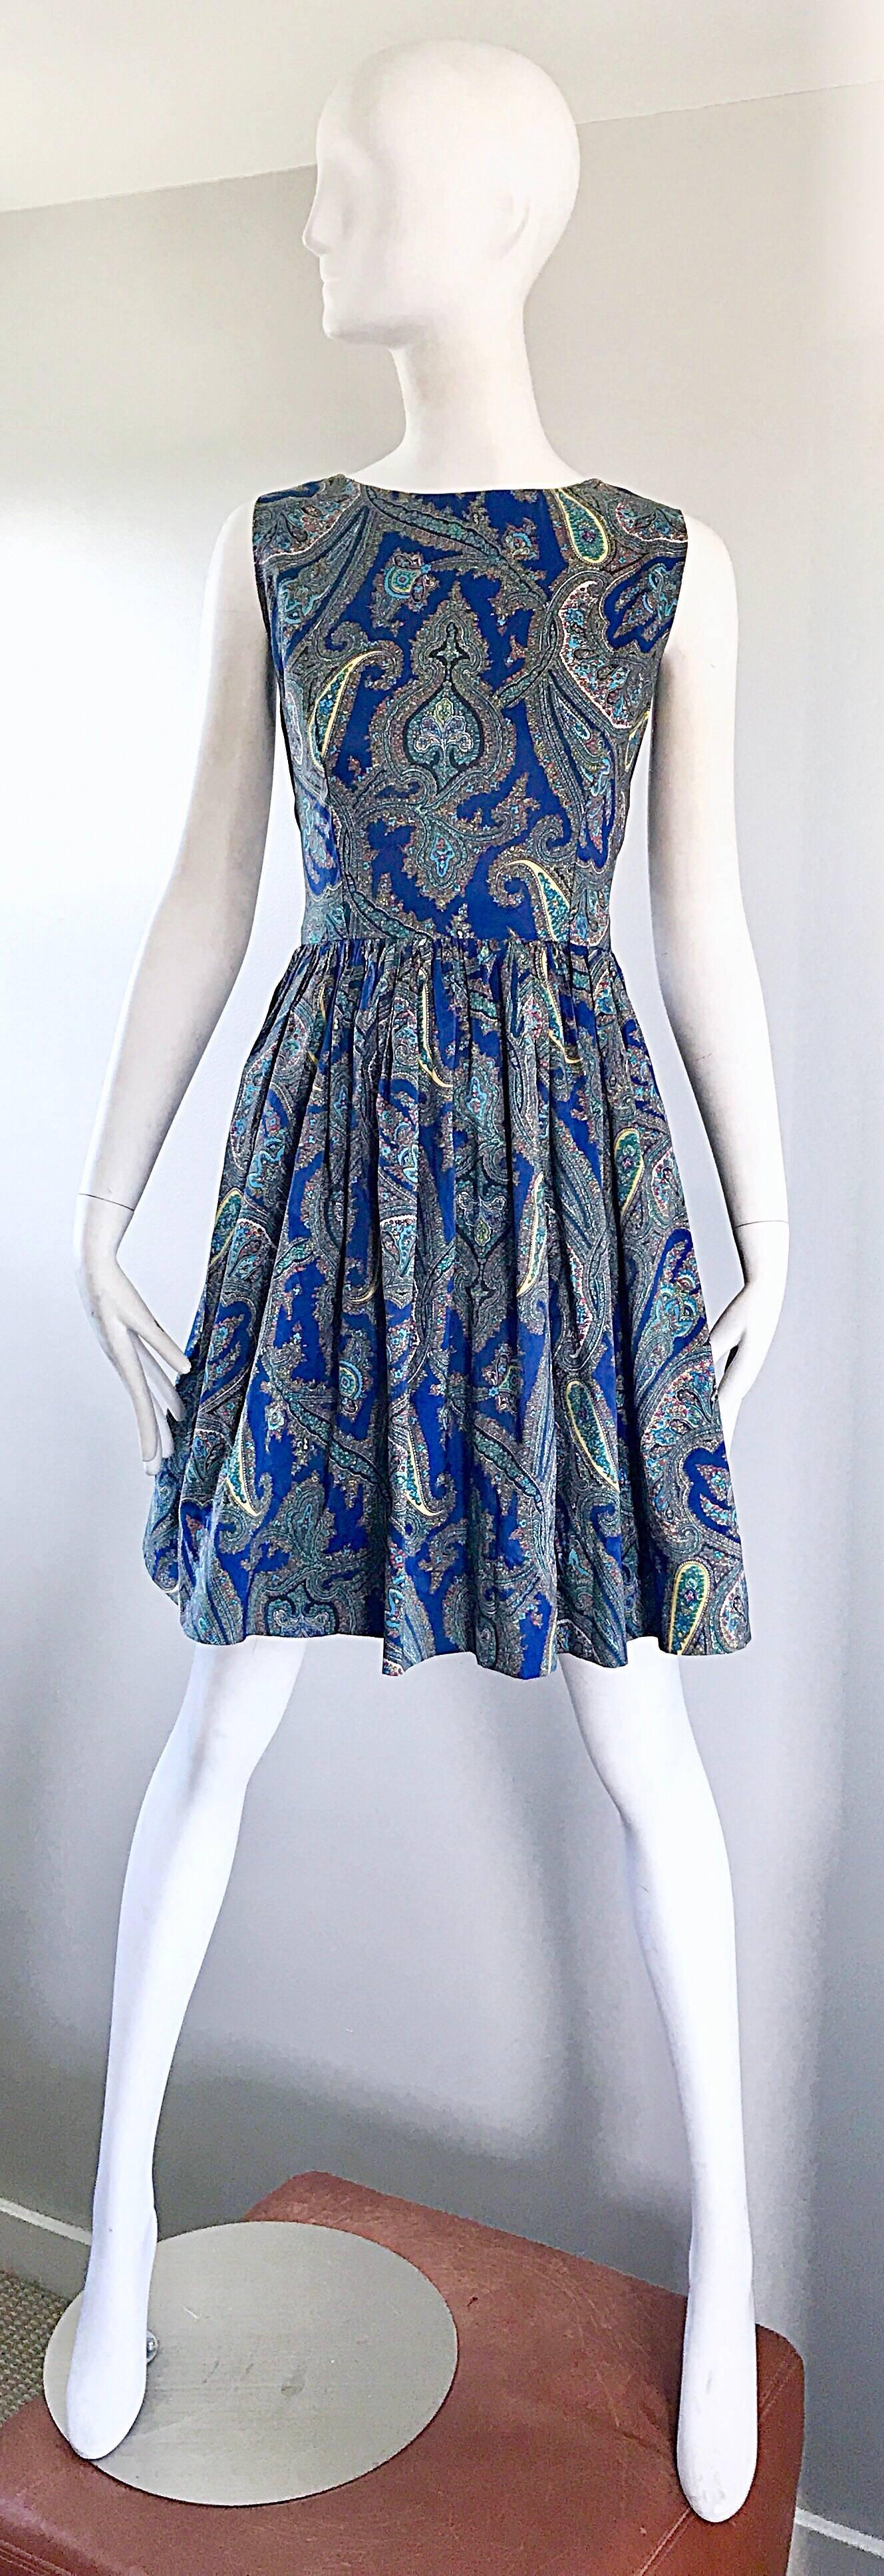 1950s Gorgeous Blue Paisley Fit n' Flare Vintage 50s Sleeveless Silk Dress For Sale 3